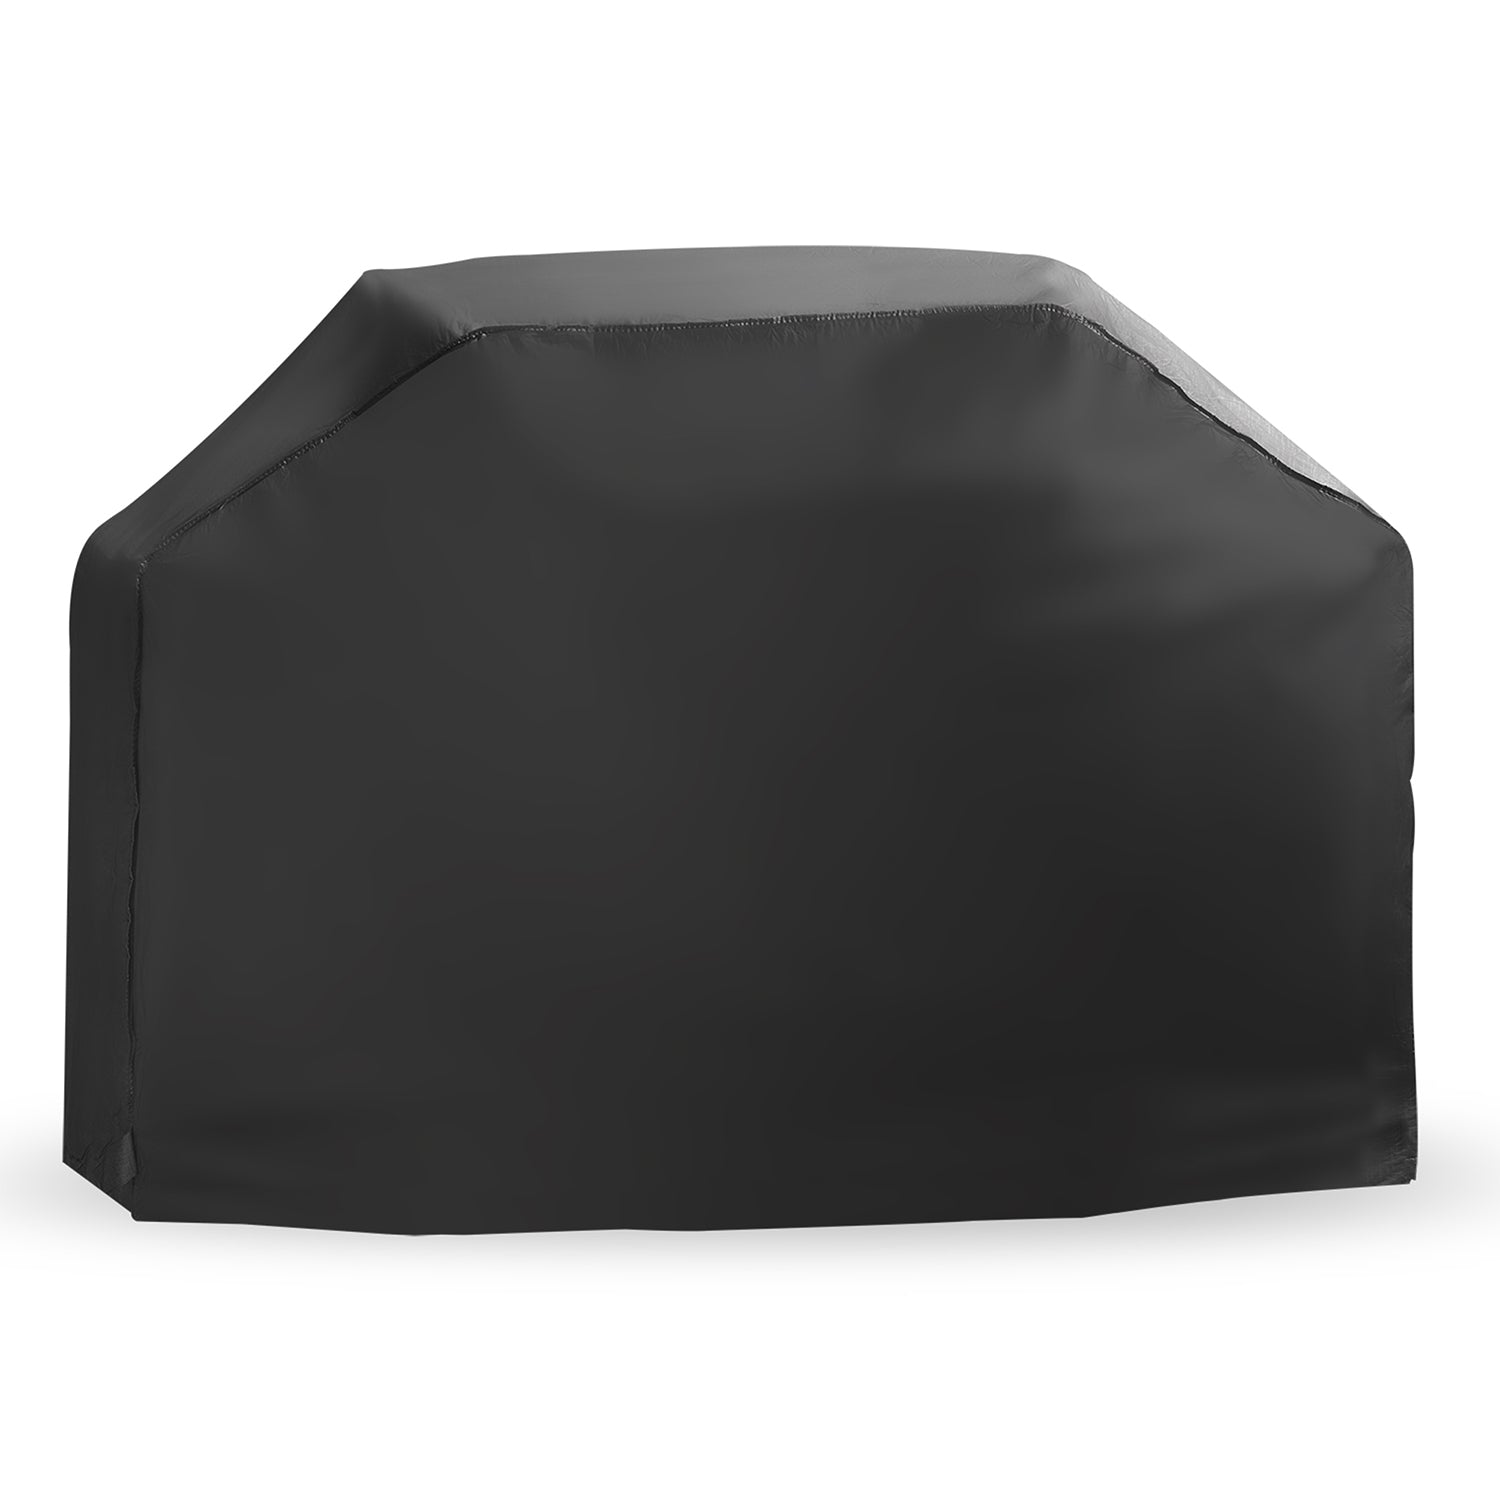 Mr. Bar-B-Q Premium Large Gas Grill Cover - image 1 of 4